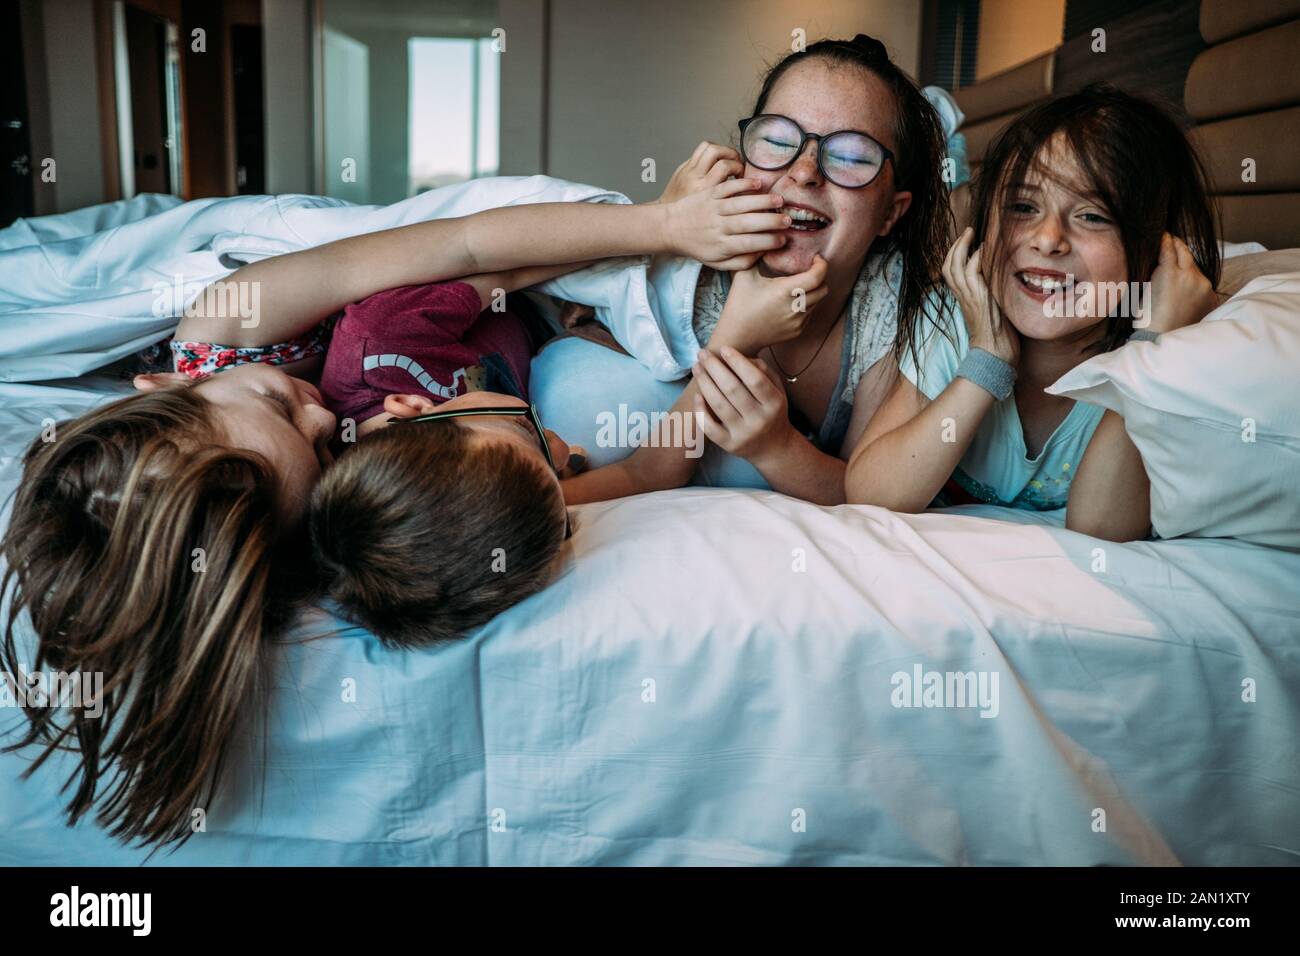 young kids playing on hotel bed while on vacation Stock Photo